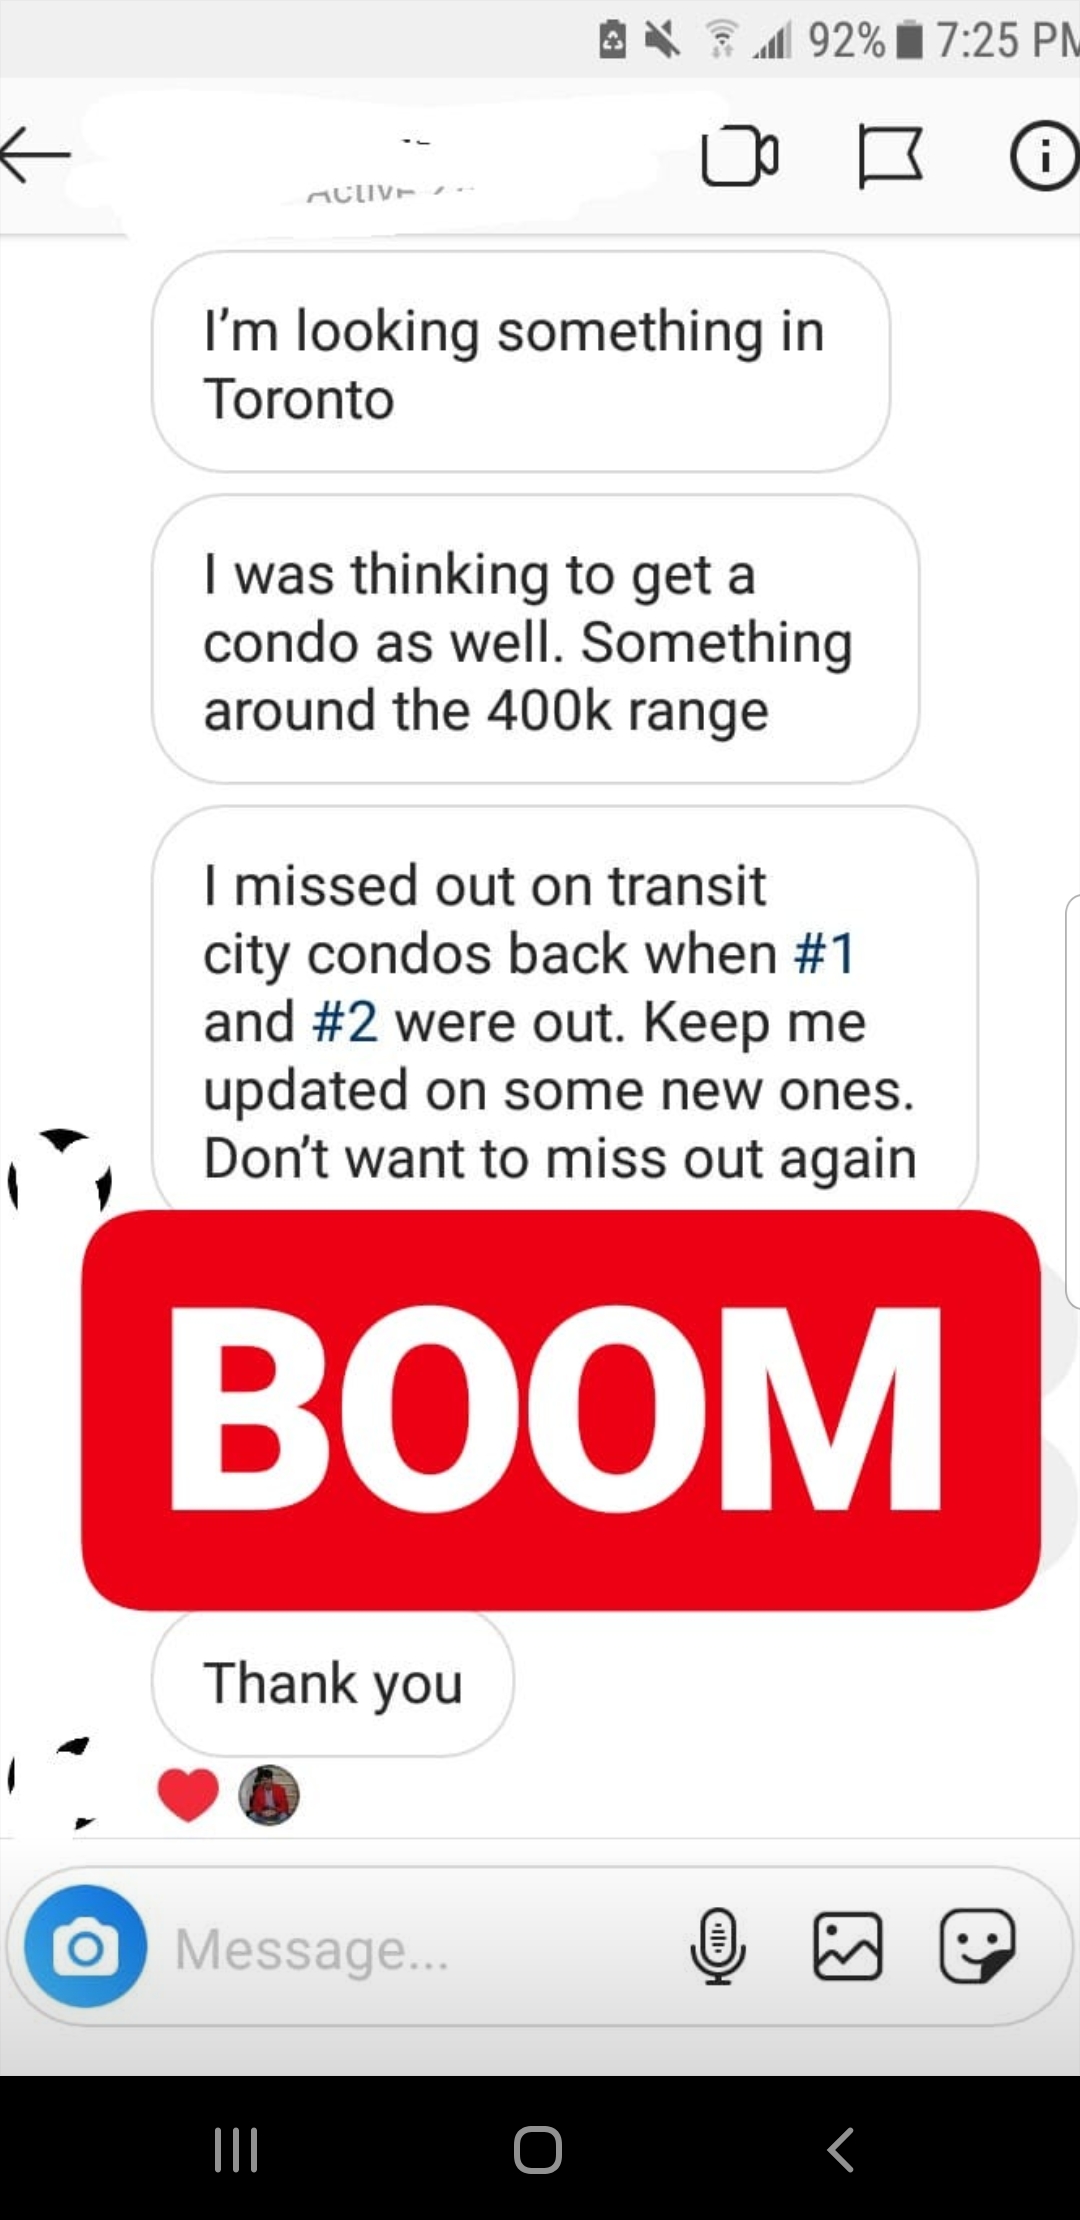 Here's someone reaching out to me and wanted to buy a condo!